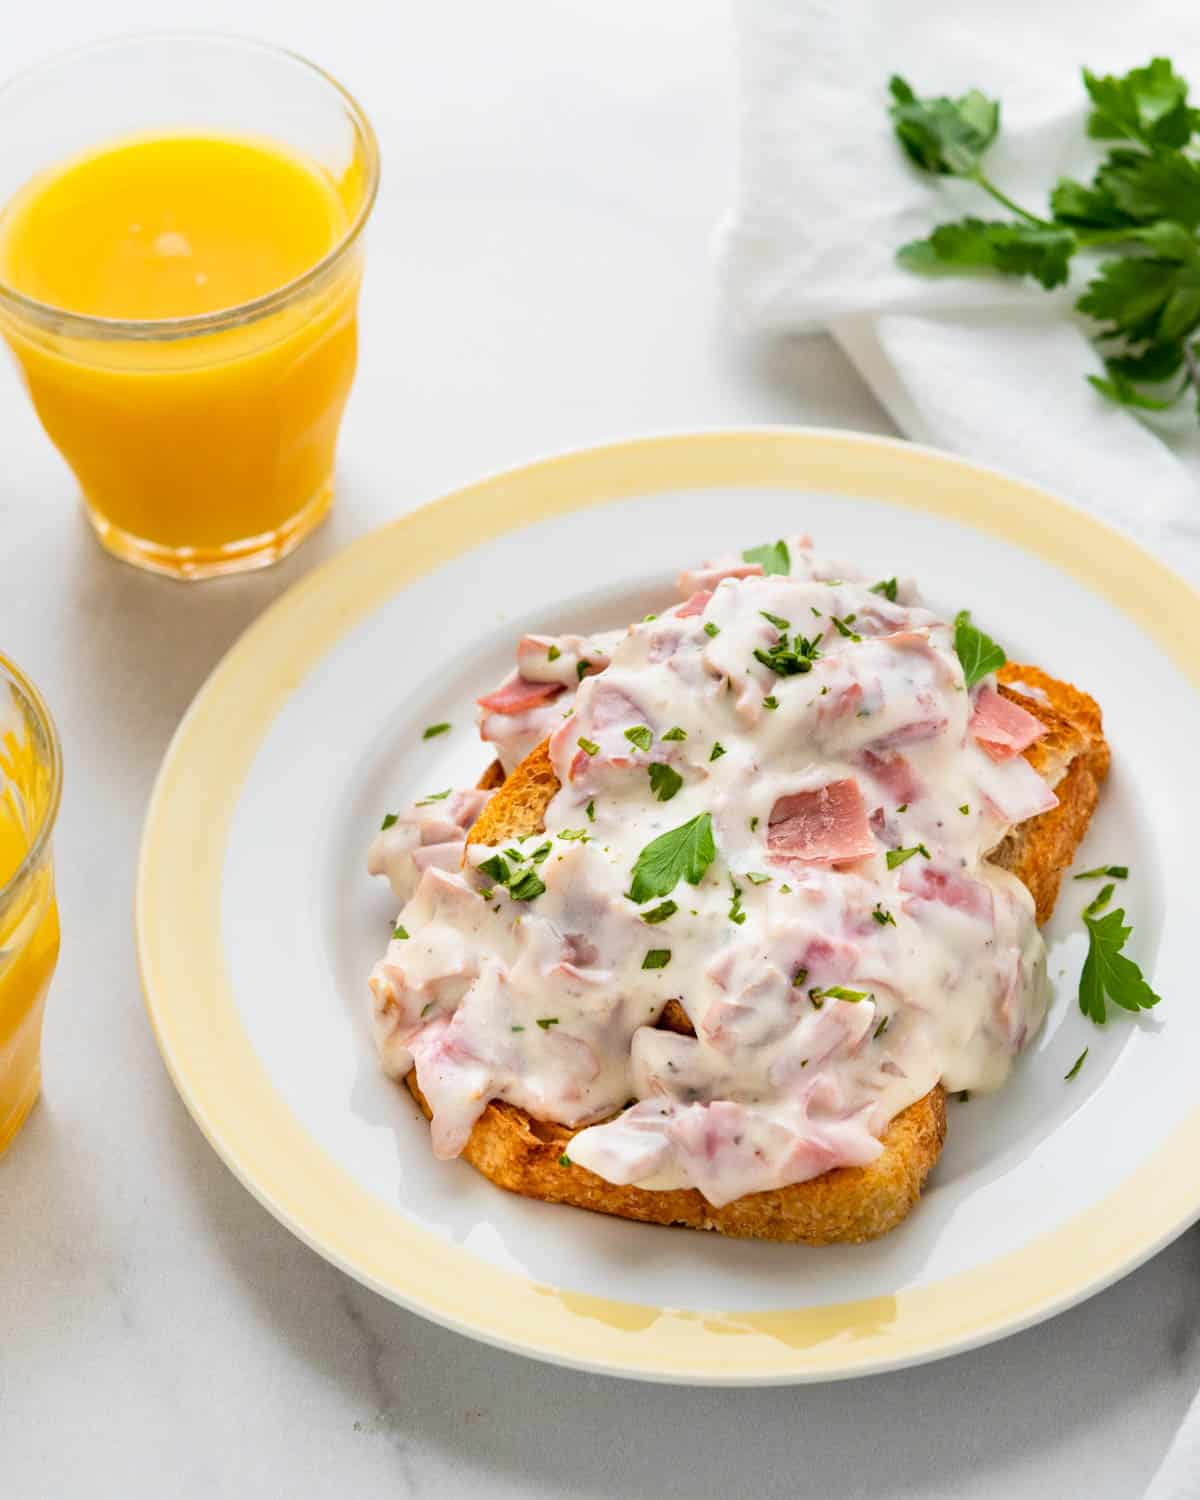 A serving of the chipped beef recipe on a plate with a yellow border.